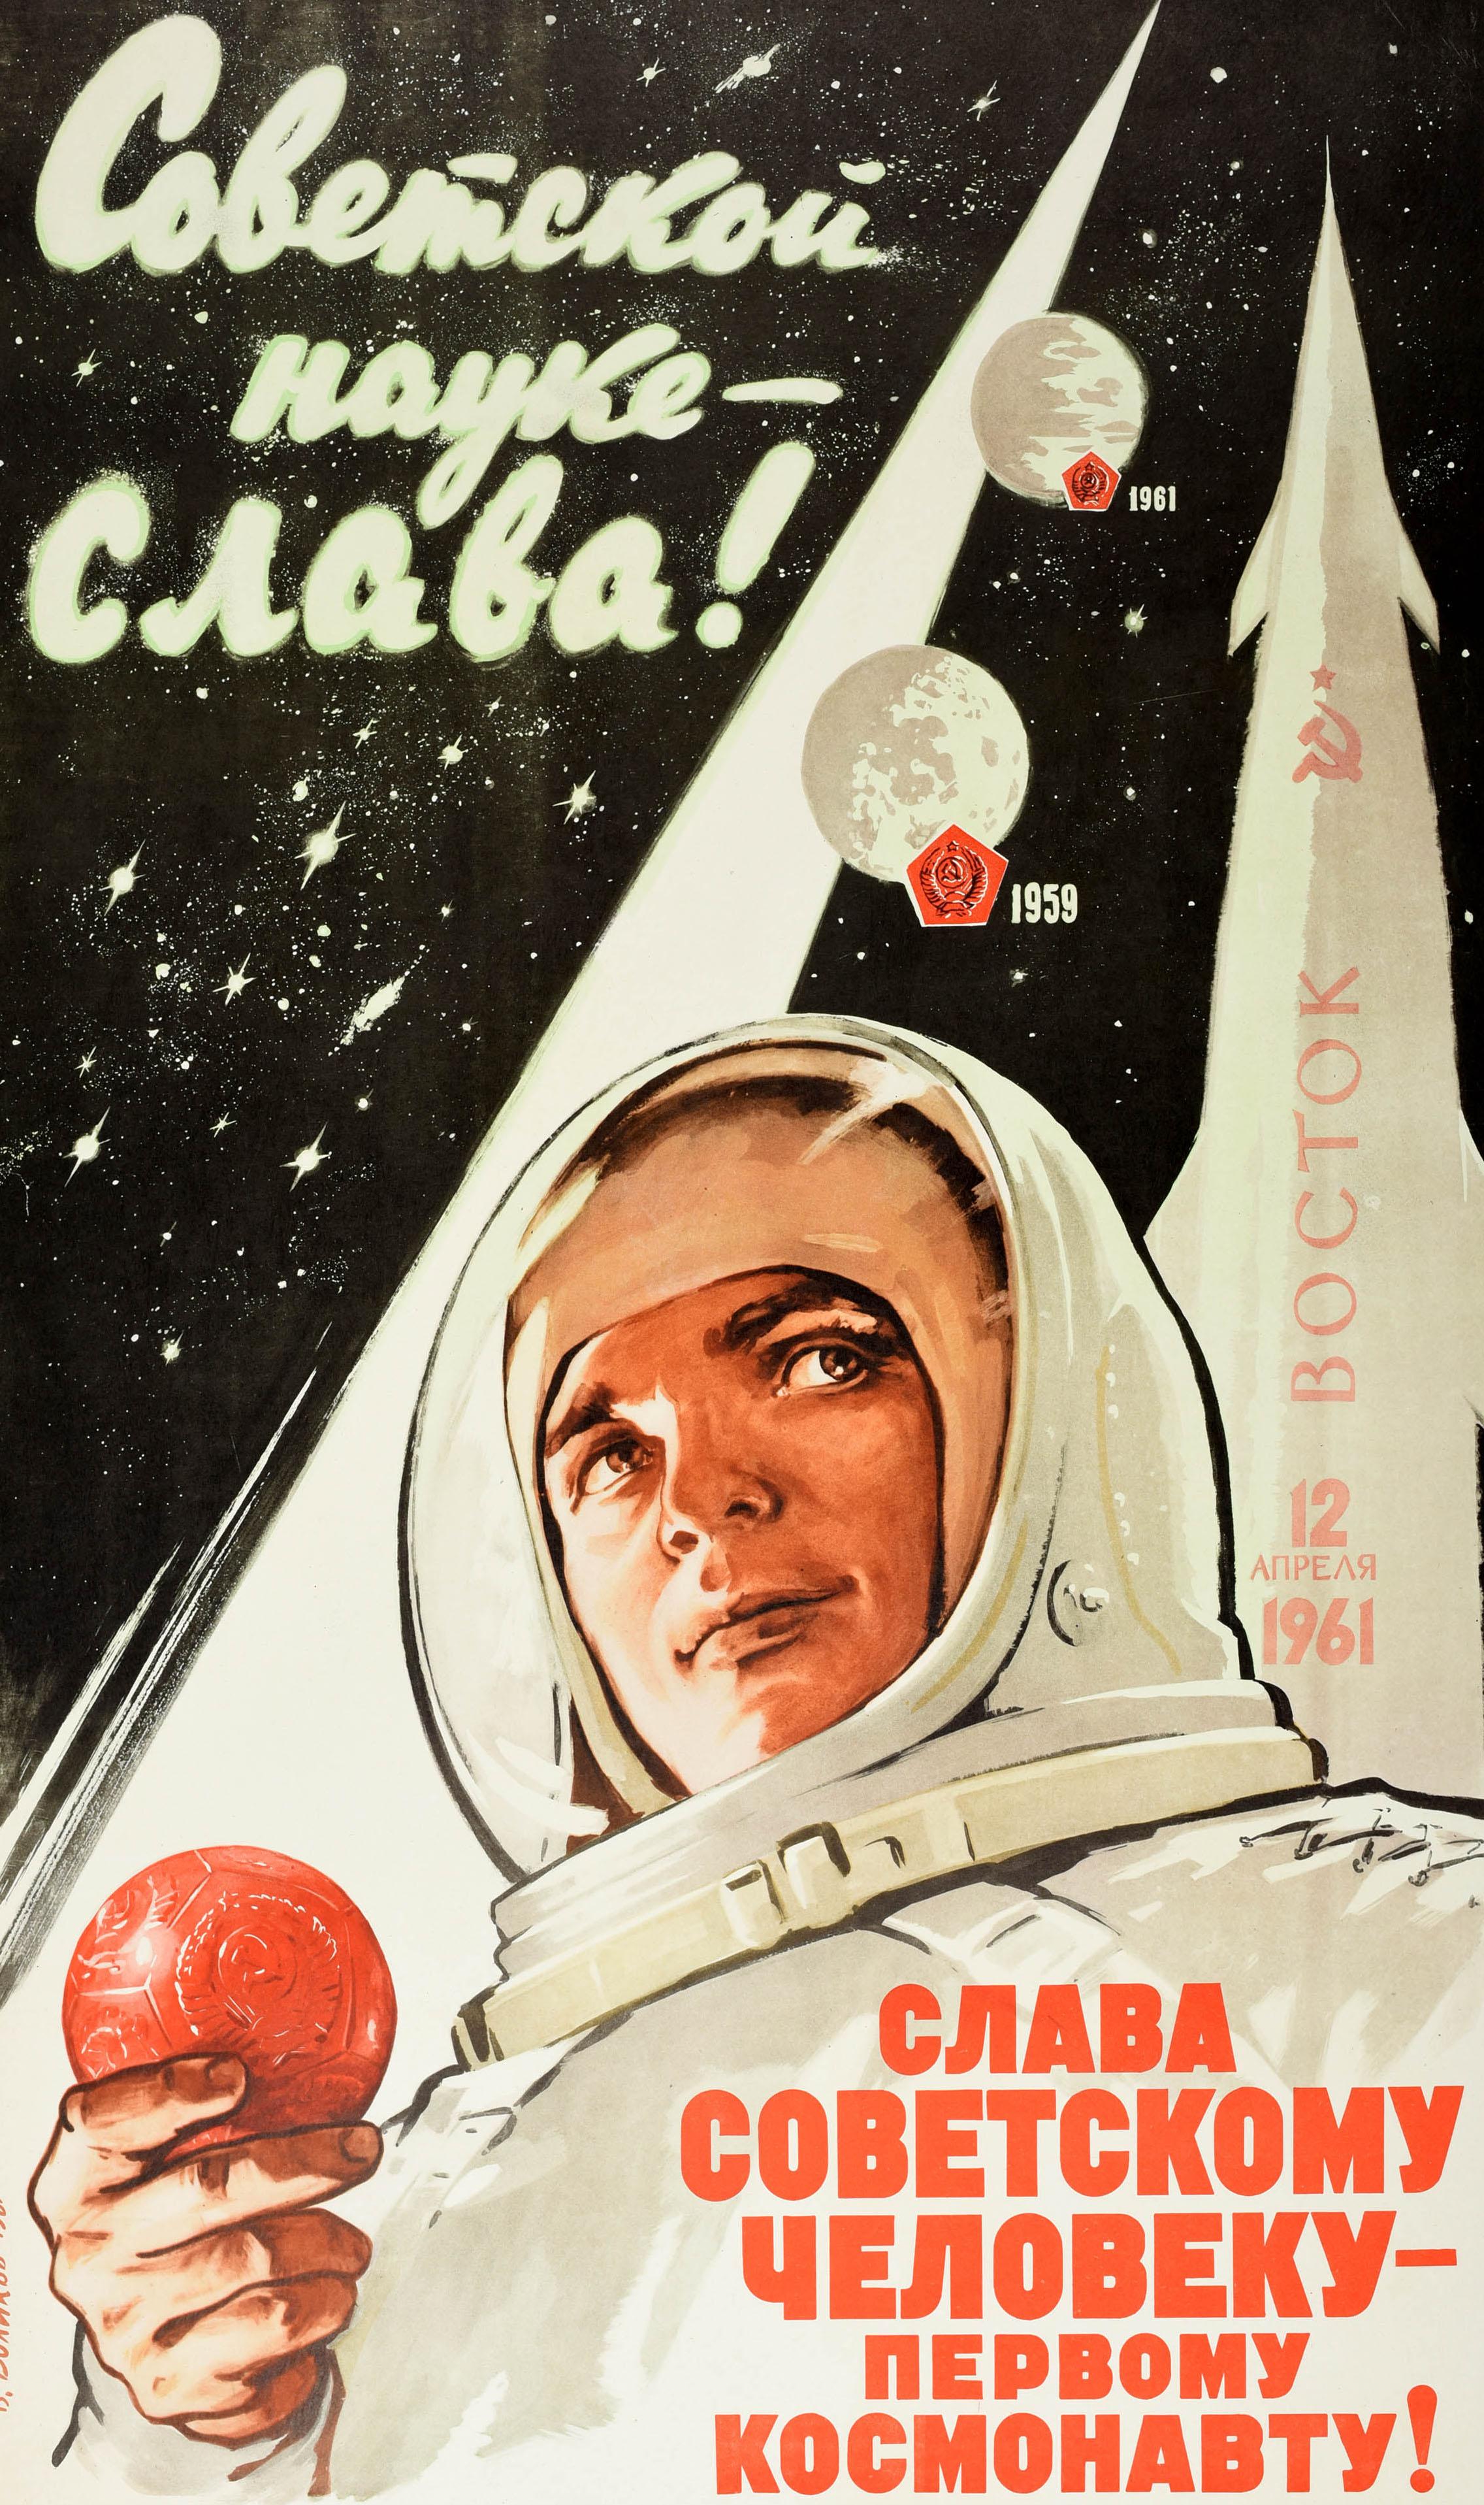 Original vintage USSR space race poster - Glory to the Soviet Man the First Cosmonaut! / ????? ?????????? ???????? ??????? ??????????! Great design depicting a cosmonaut looking up in front of a Vostok rocket marked with a Soviet hammer and sickle